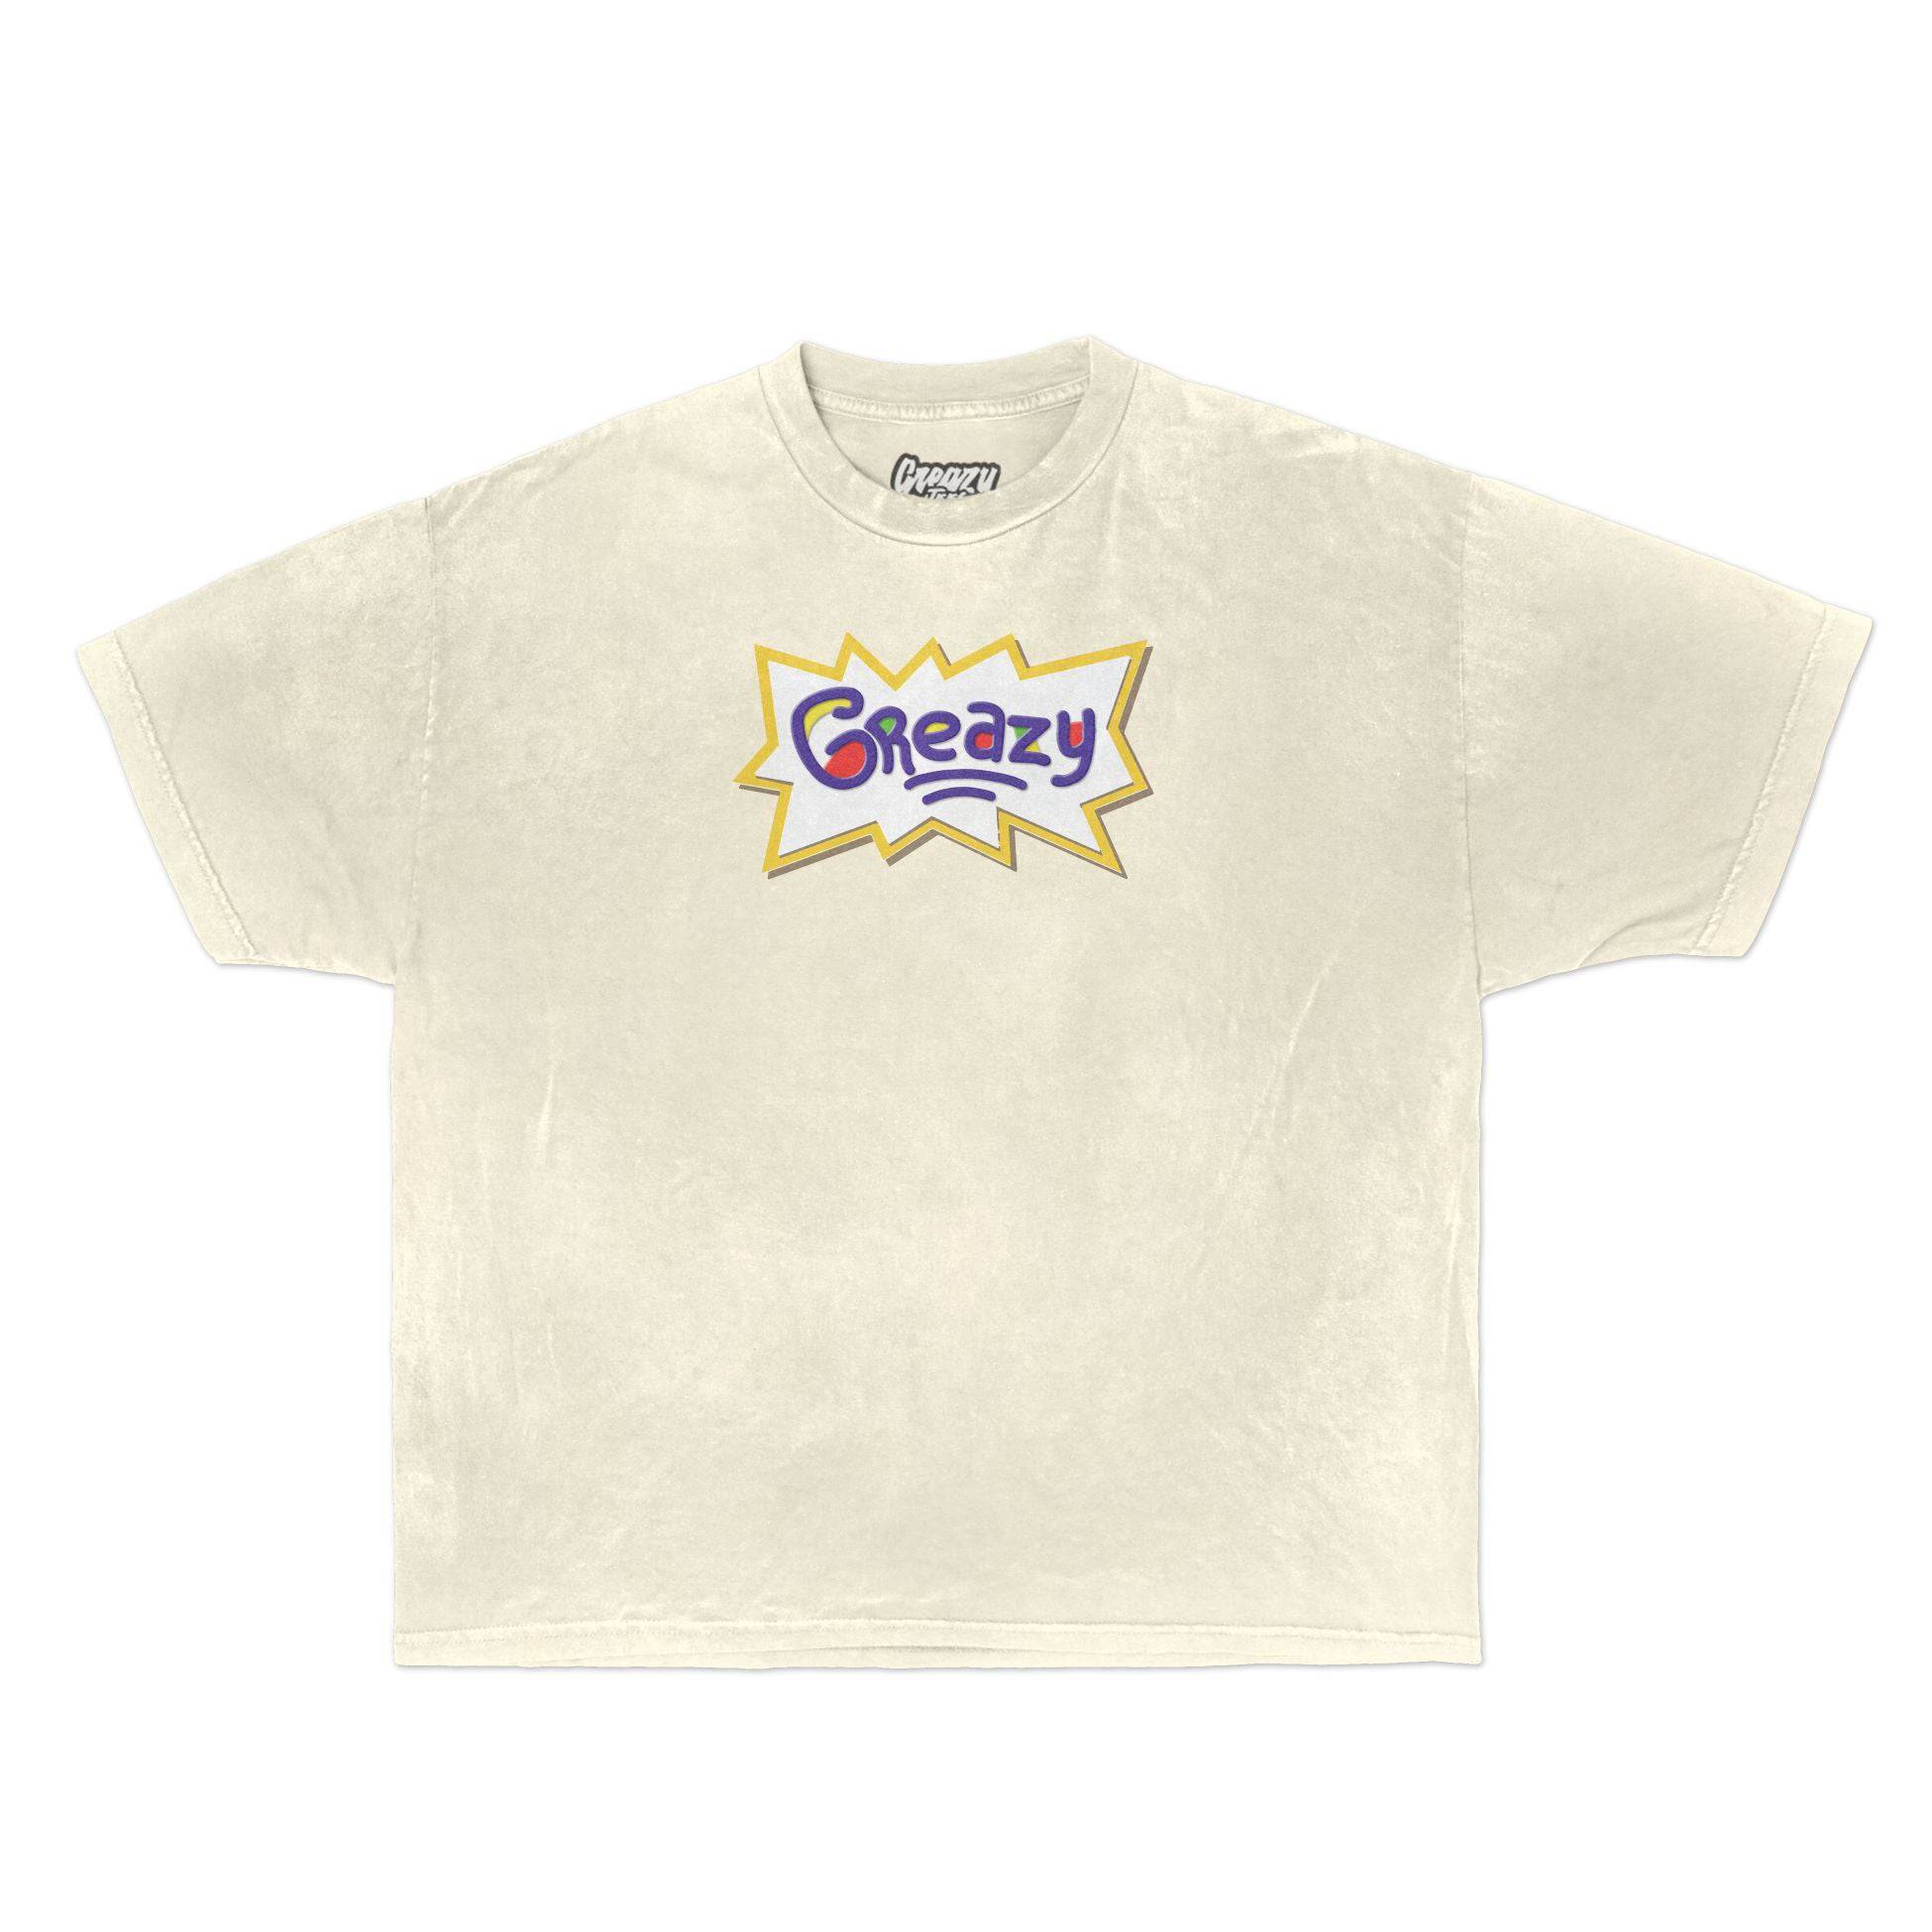 Childs Play Tee Tee Greazy Tees XS Off White Oversized